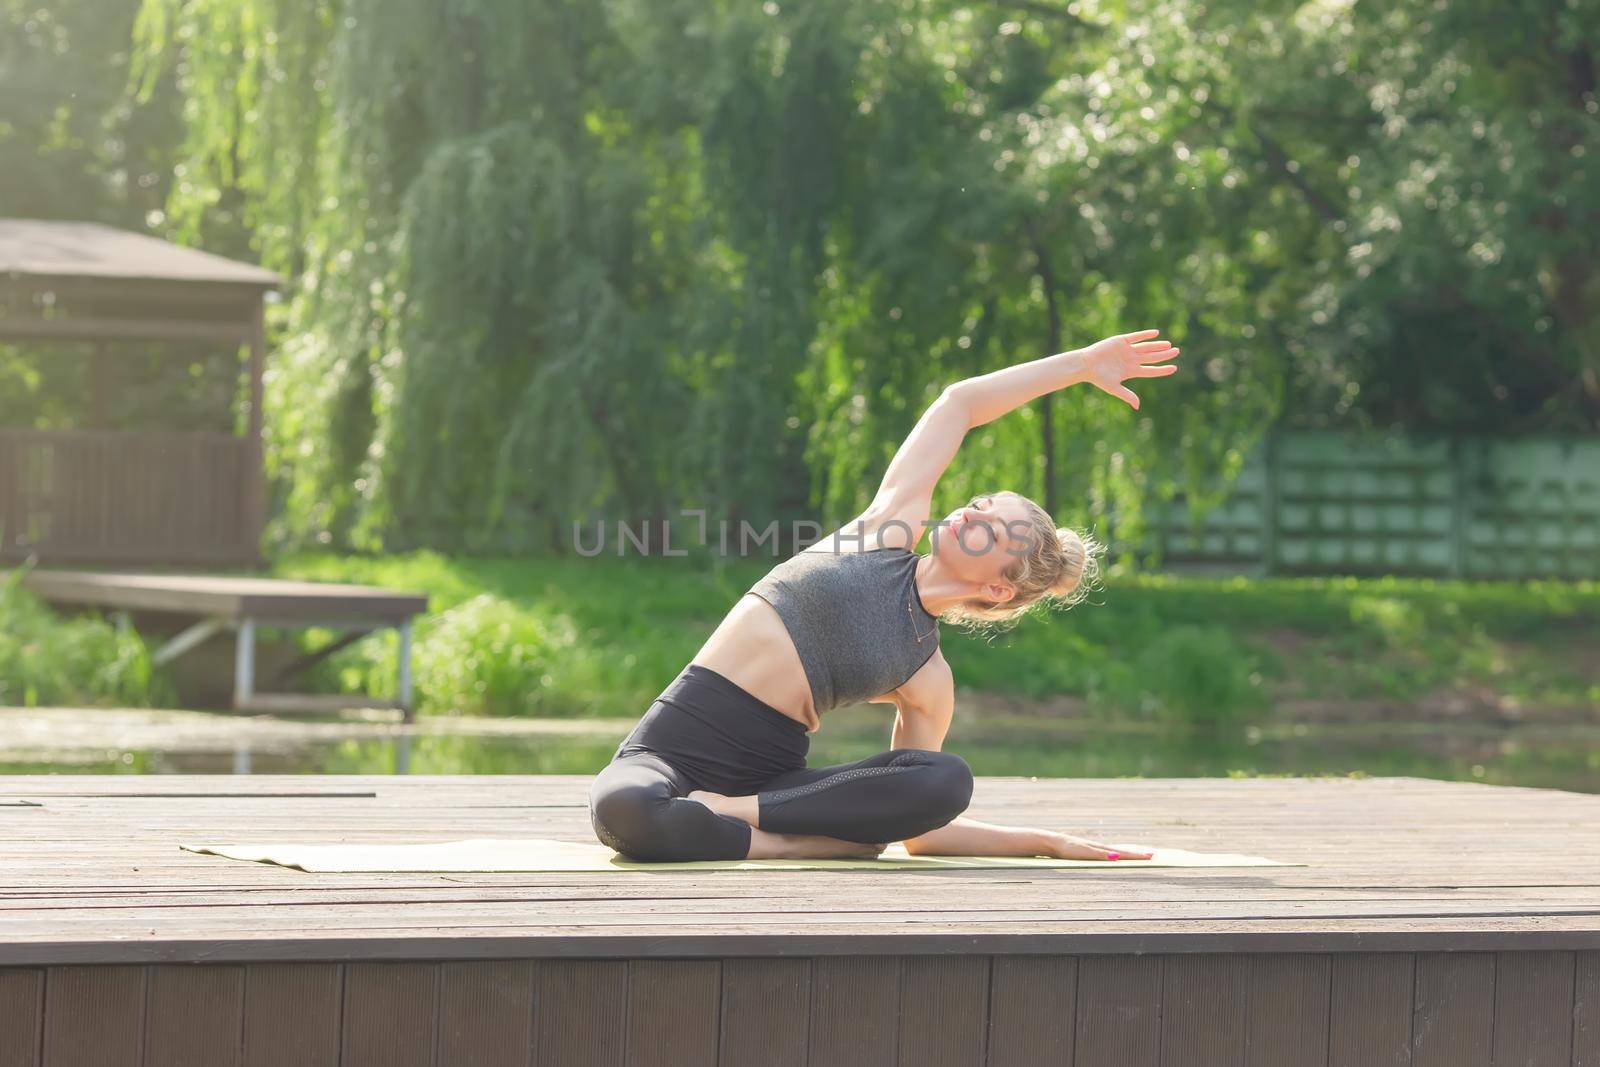 A slender woman in a gray top and leggings, sitting on a wooden platform by a pond in the park in summer and performing a body tilt sideways with her arm raised. Copy space